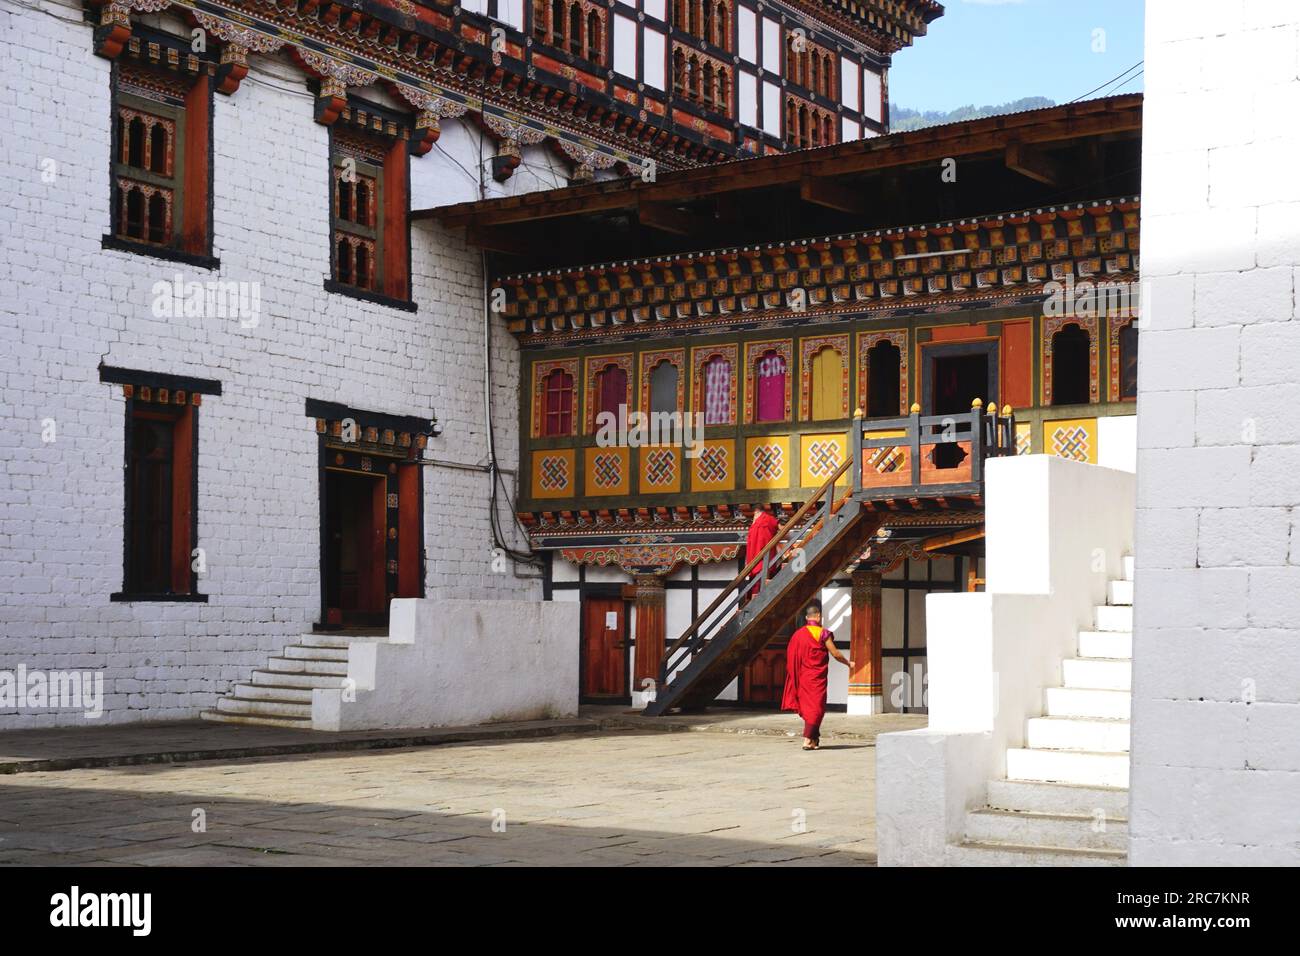 A pair of red-robed Buddhist monks walk near a traditional colorful painted building on the grounds of Tashichho Dzong in Thimphu, Bhutan. Stock Photo